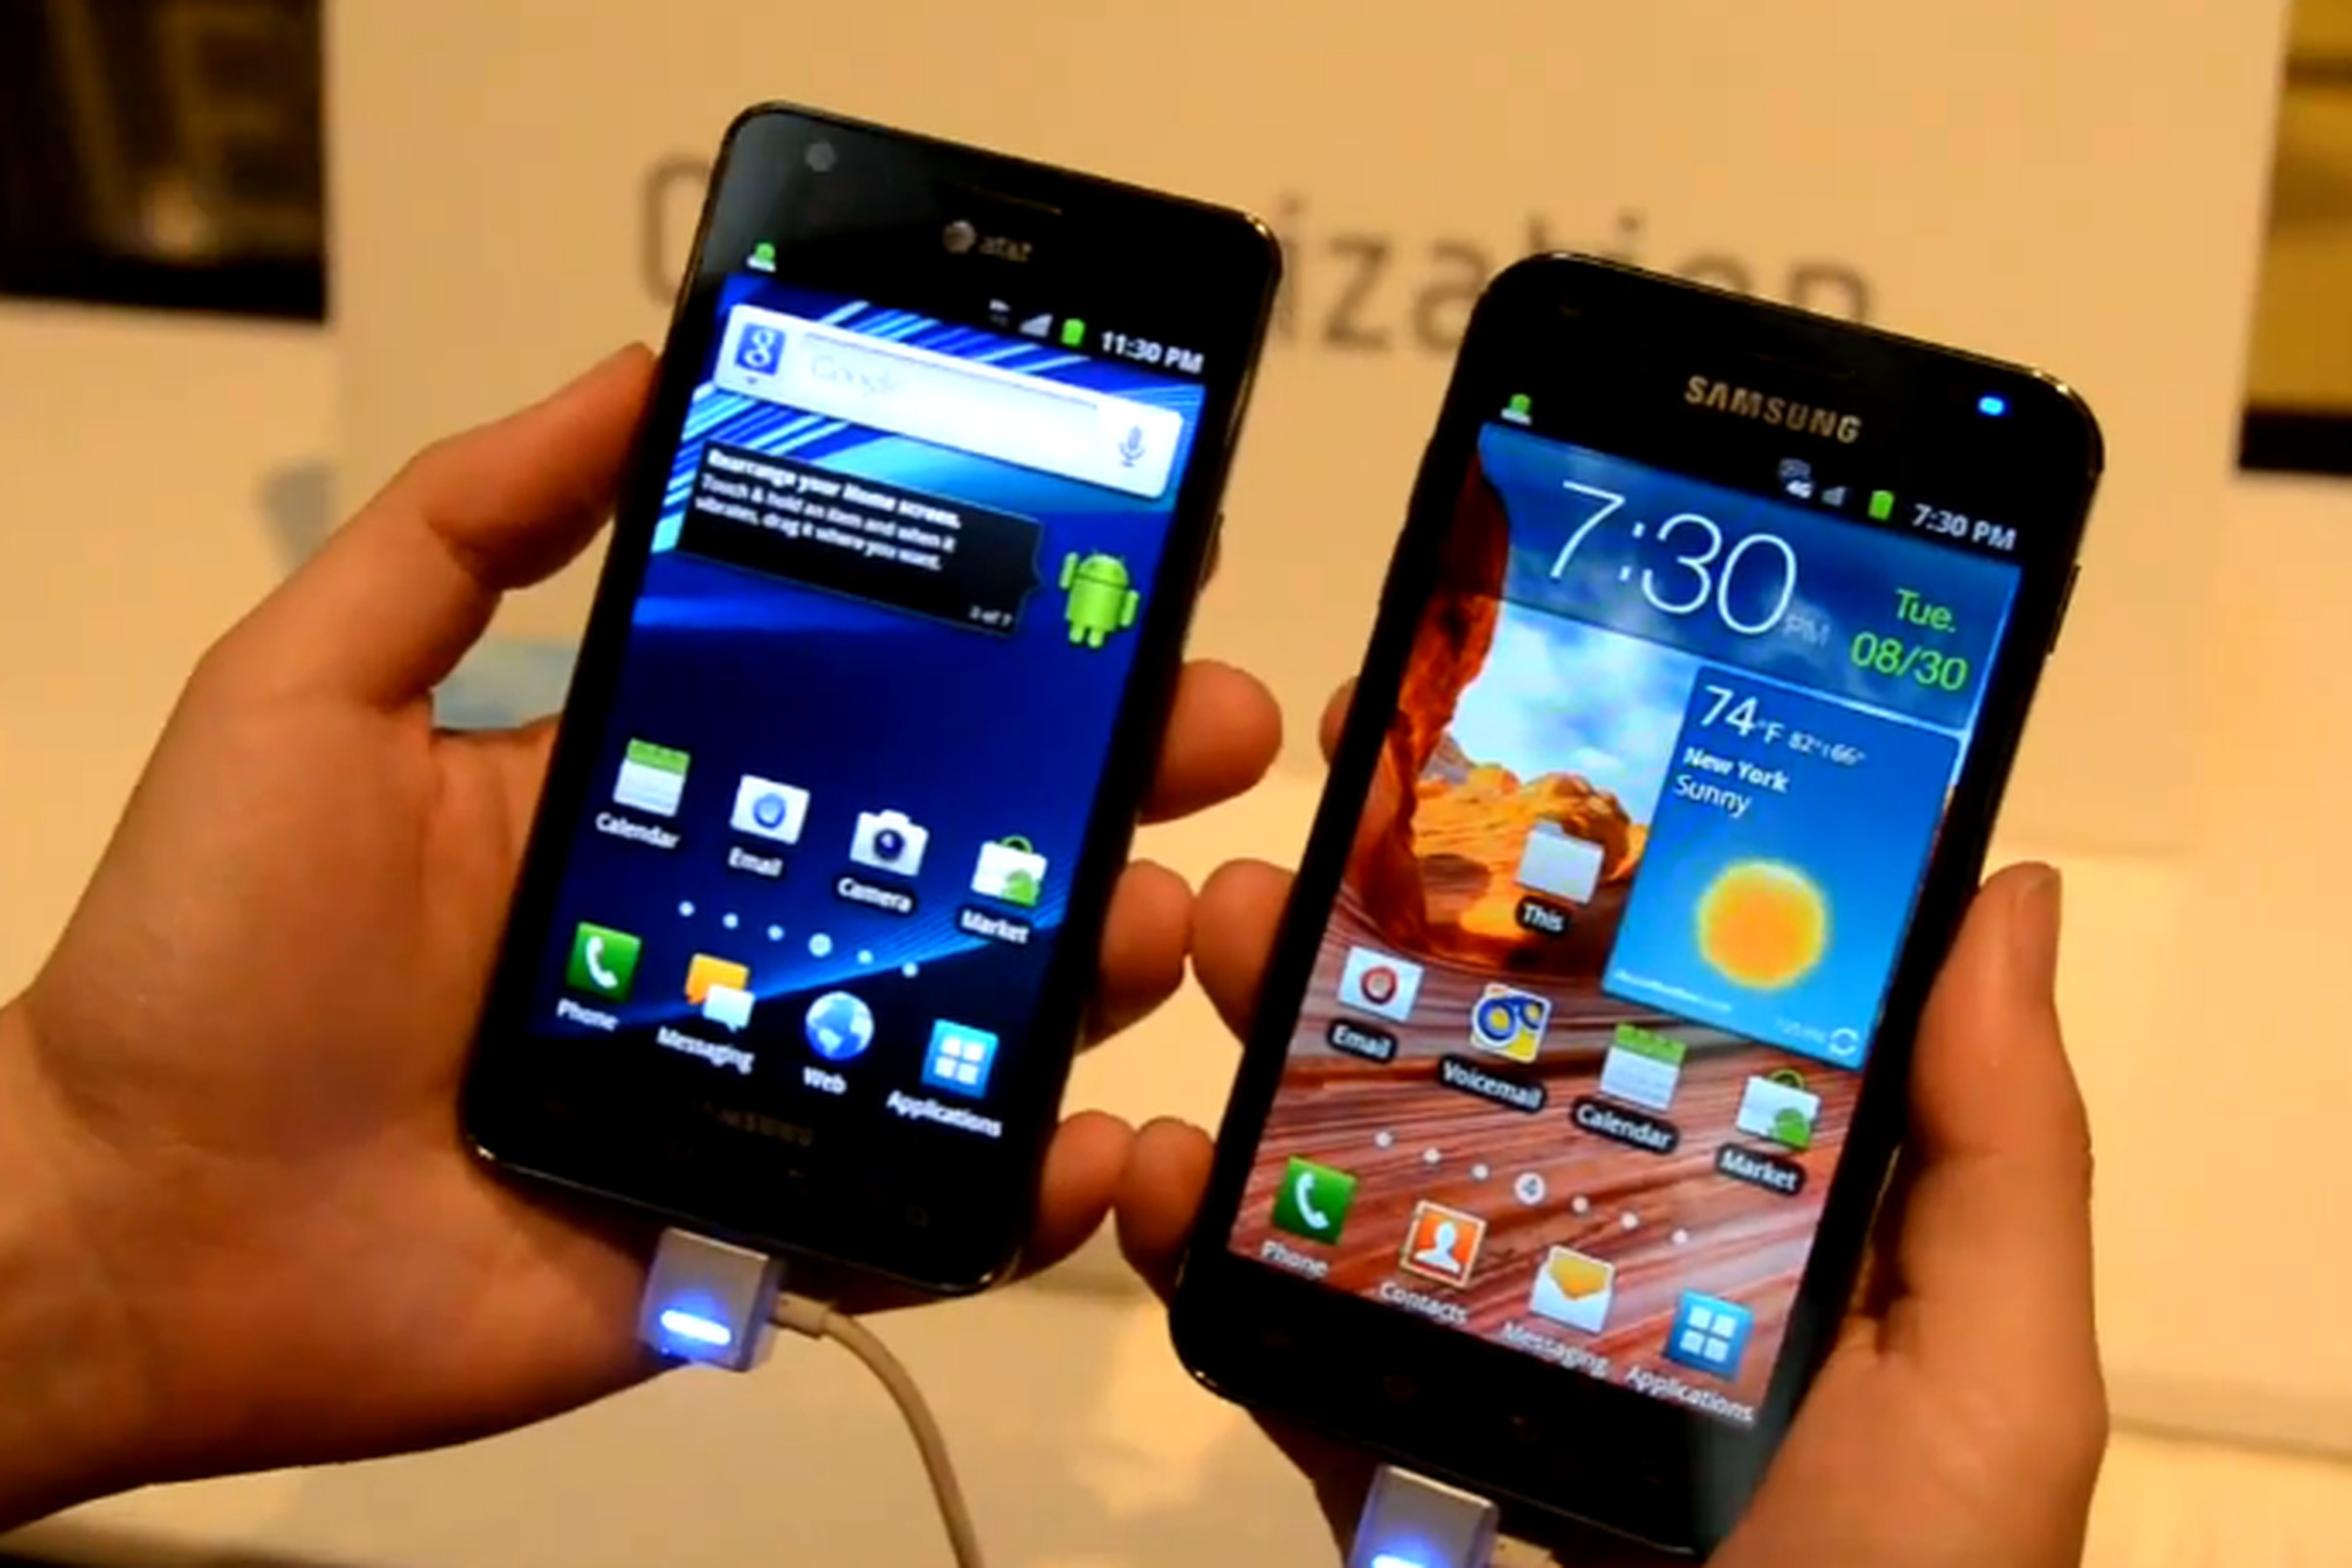 Galaxy SII AT&T, Sprint Galaxy S II Epic 4G Touch hands-on